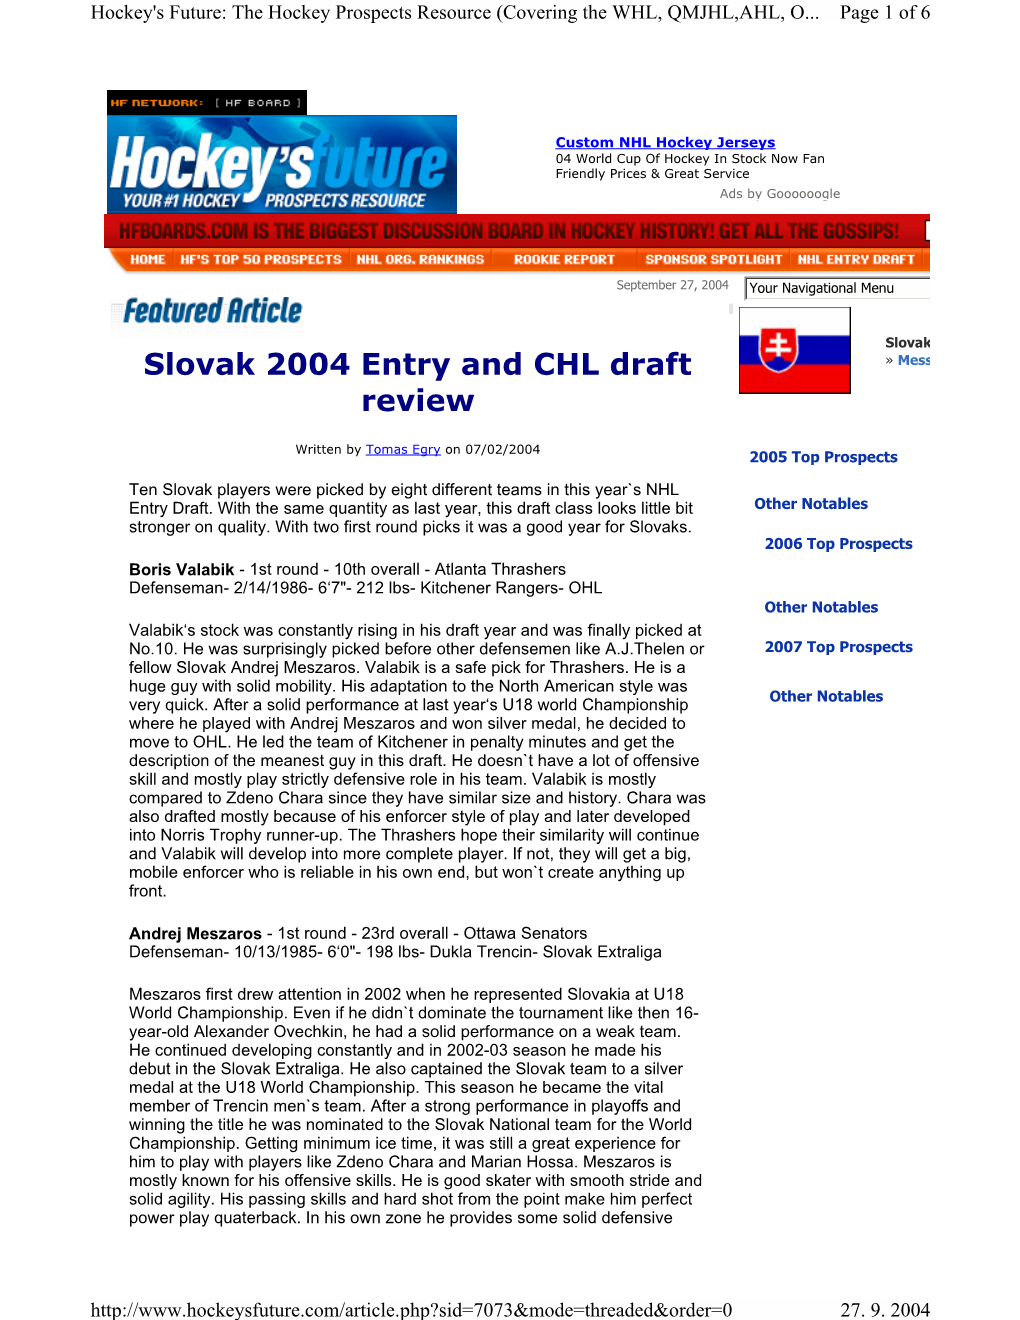 Slovak 2004 Entry and CHL Draft Review